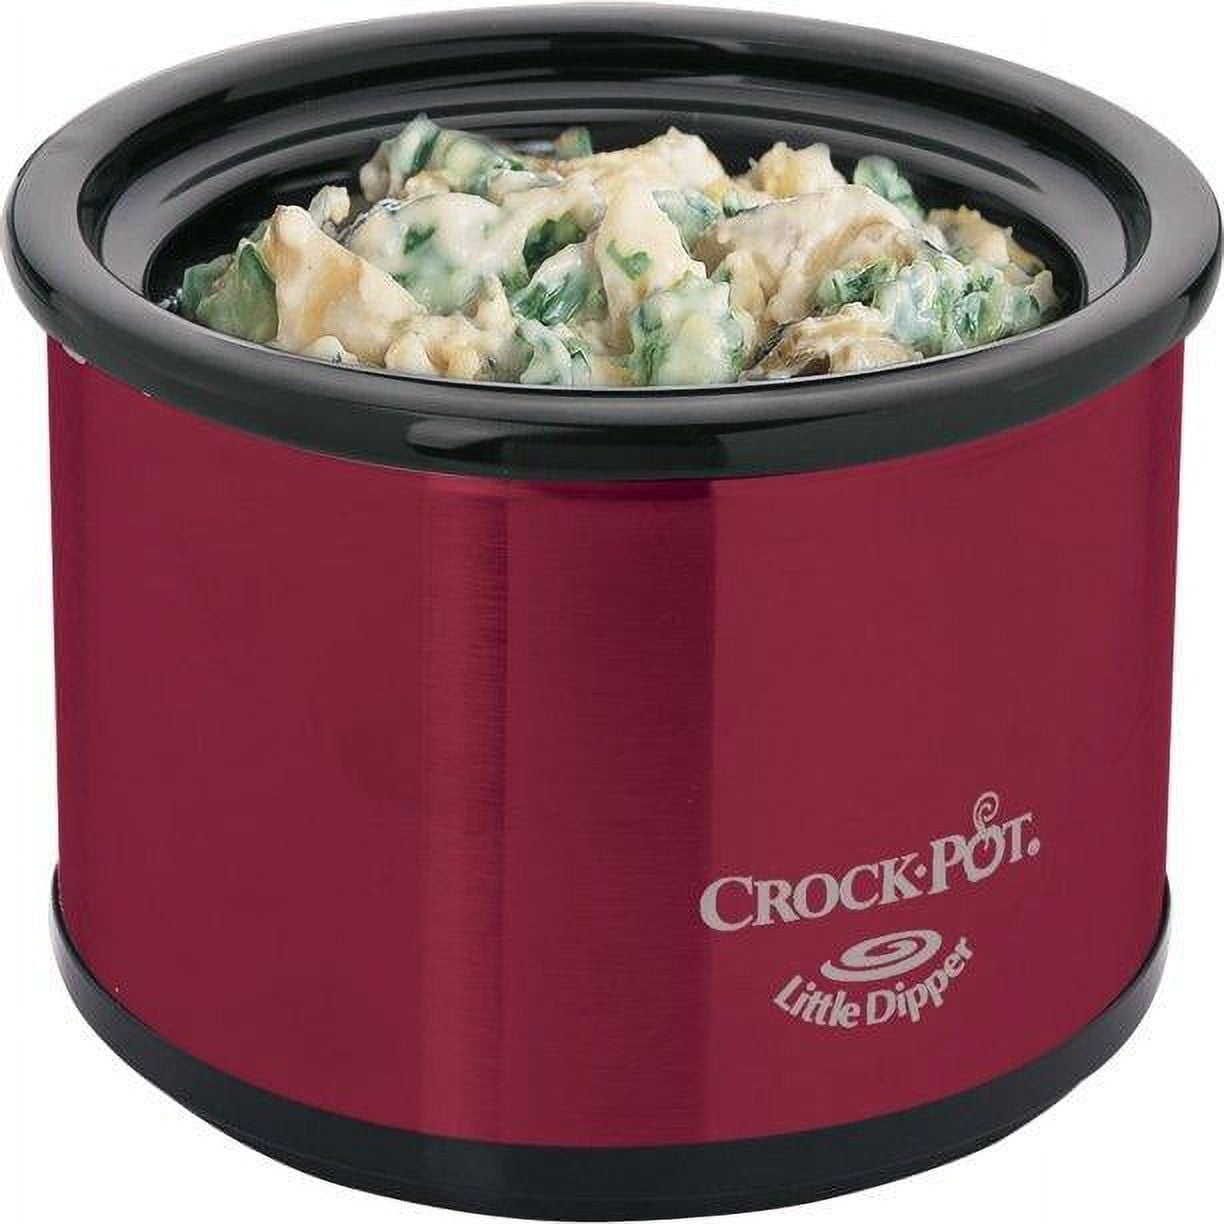 Crock-Pot Slow Cooker with Little Dipper Warmer, 2 pc - Fred Meyer